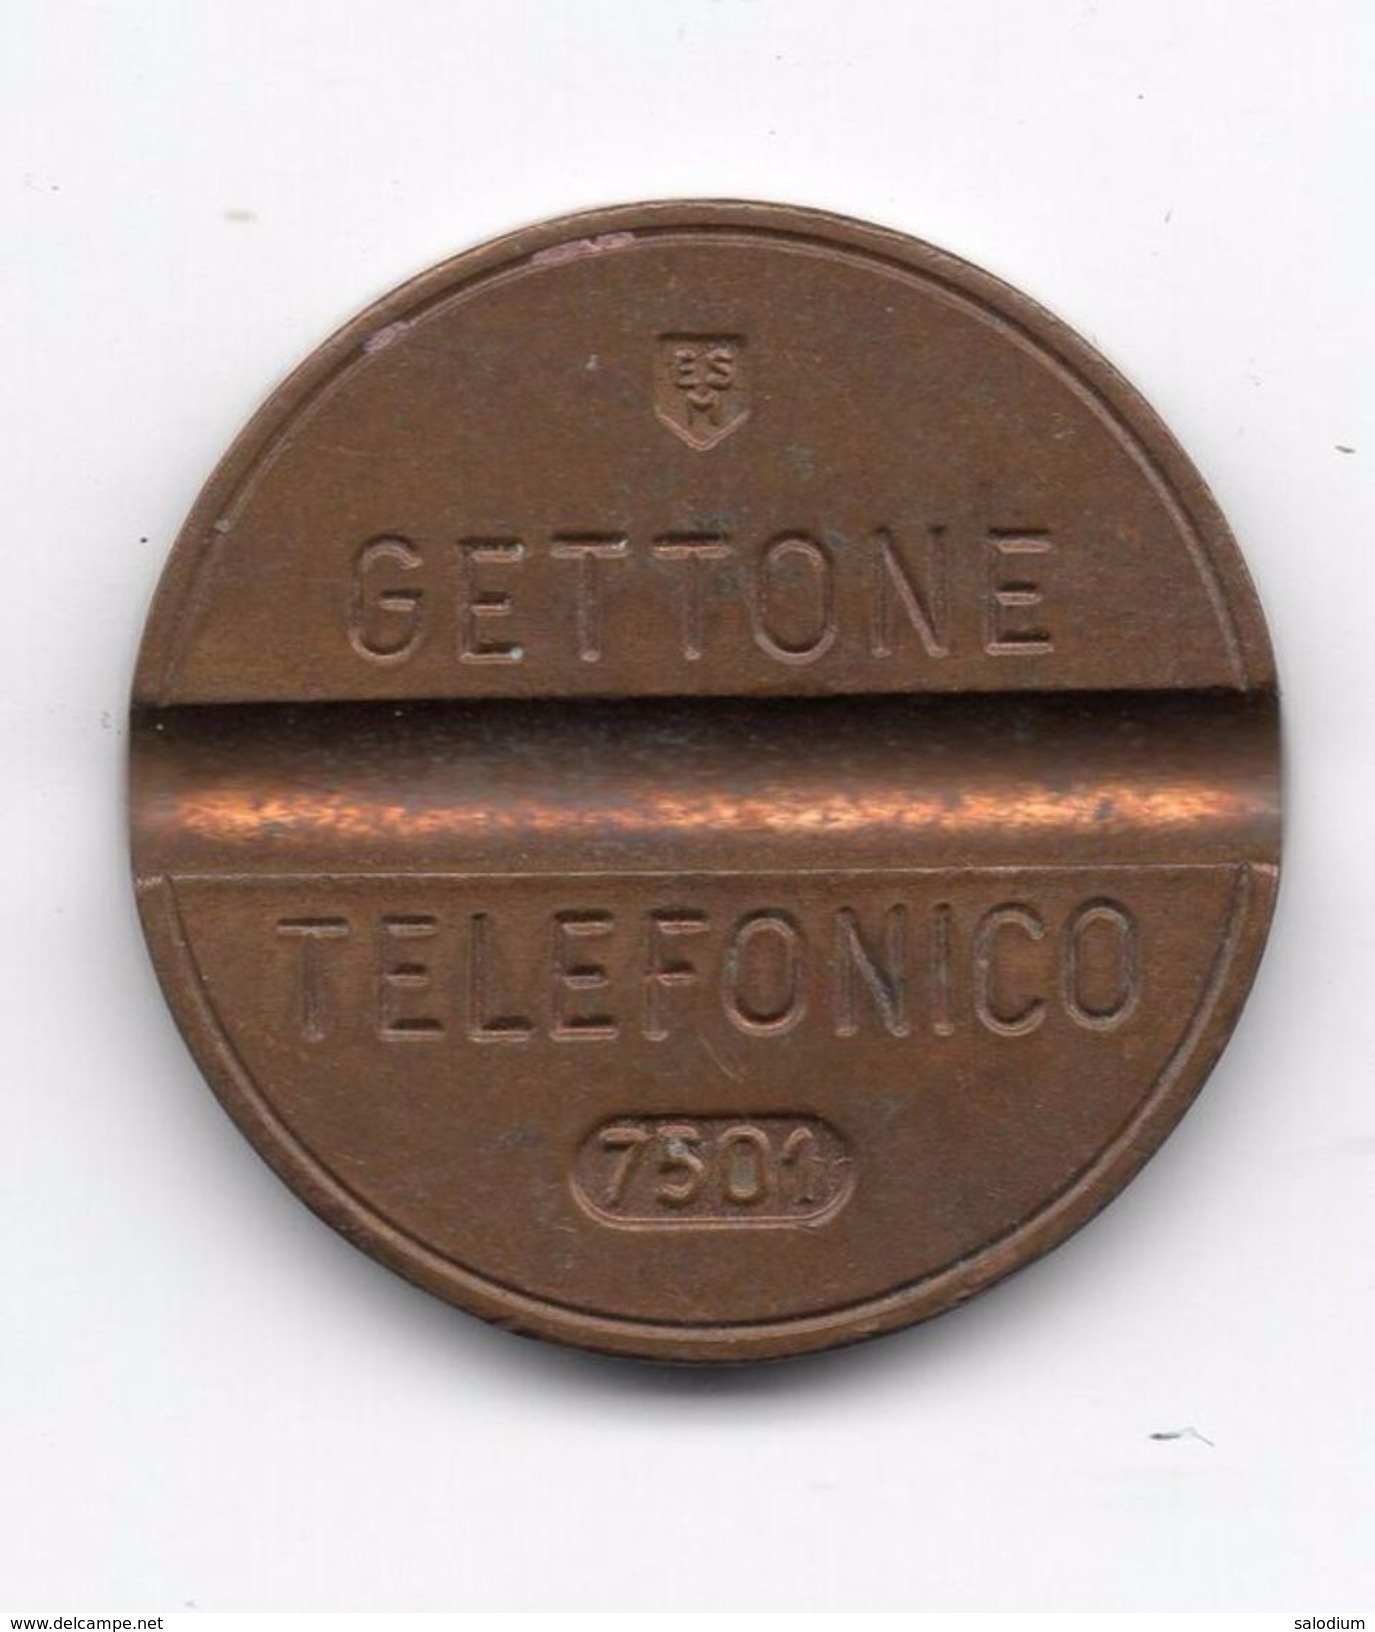 Gettone Telefonico 7501 Token Telephone - (Id-828) - Professionals/Firms